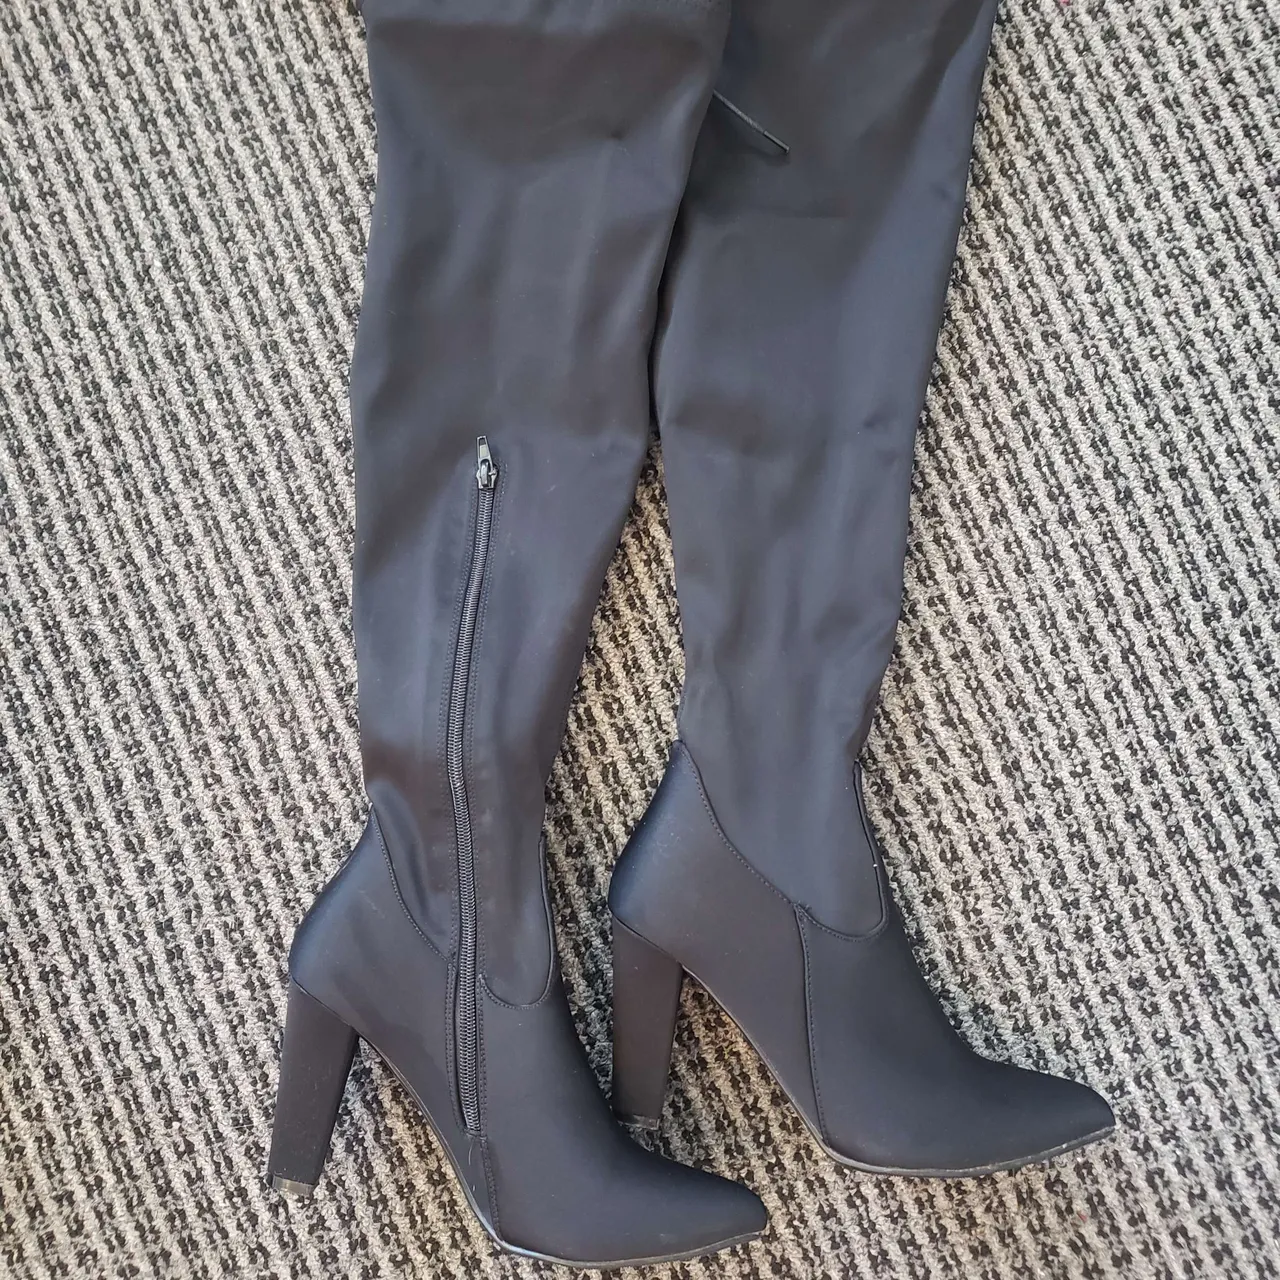 Gorgeous new knee high boots photo 1